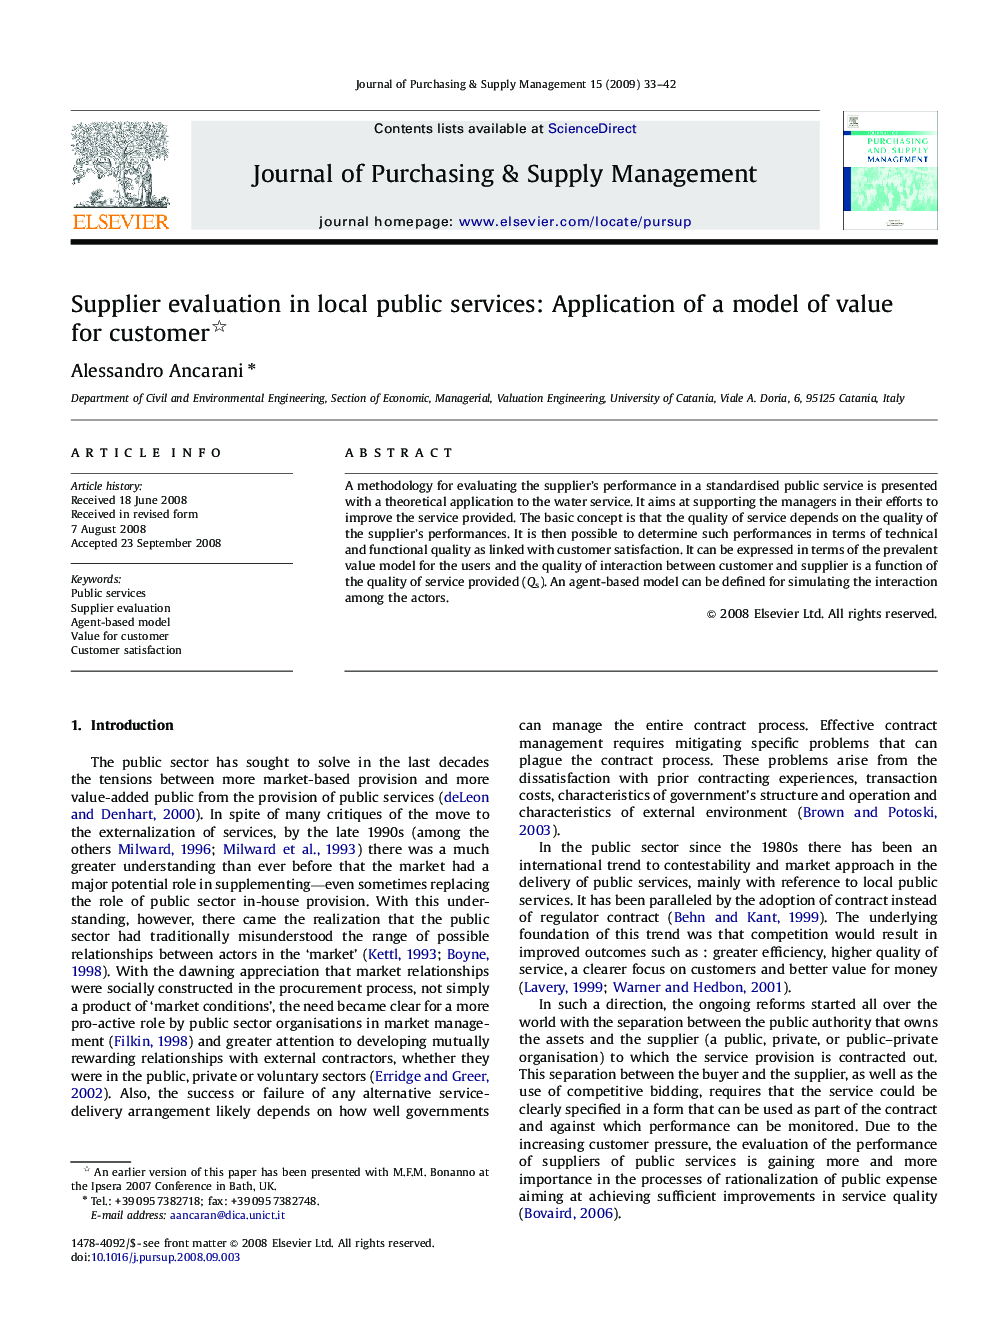 Supplier evaluation in local public services: Application of a model of value for customer 